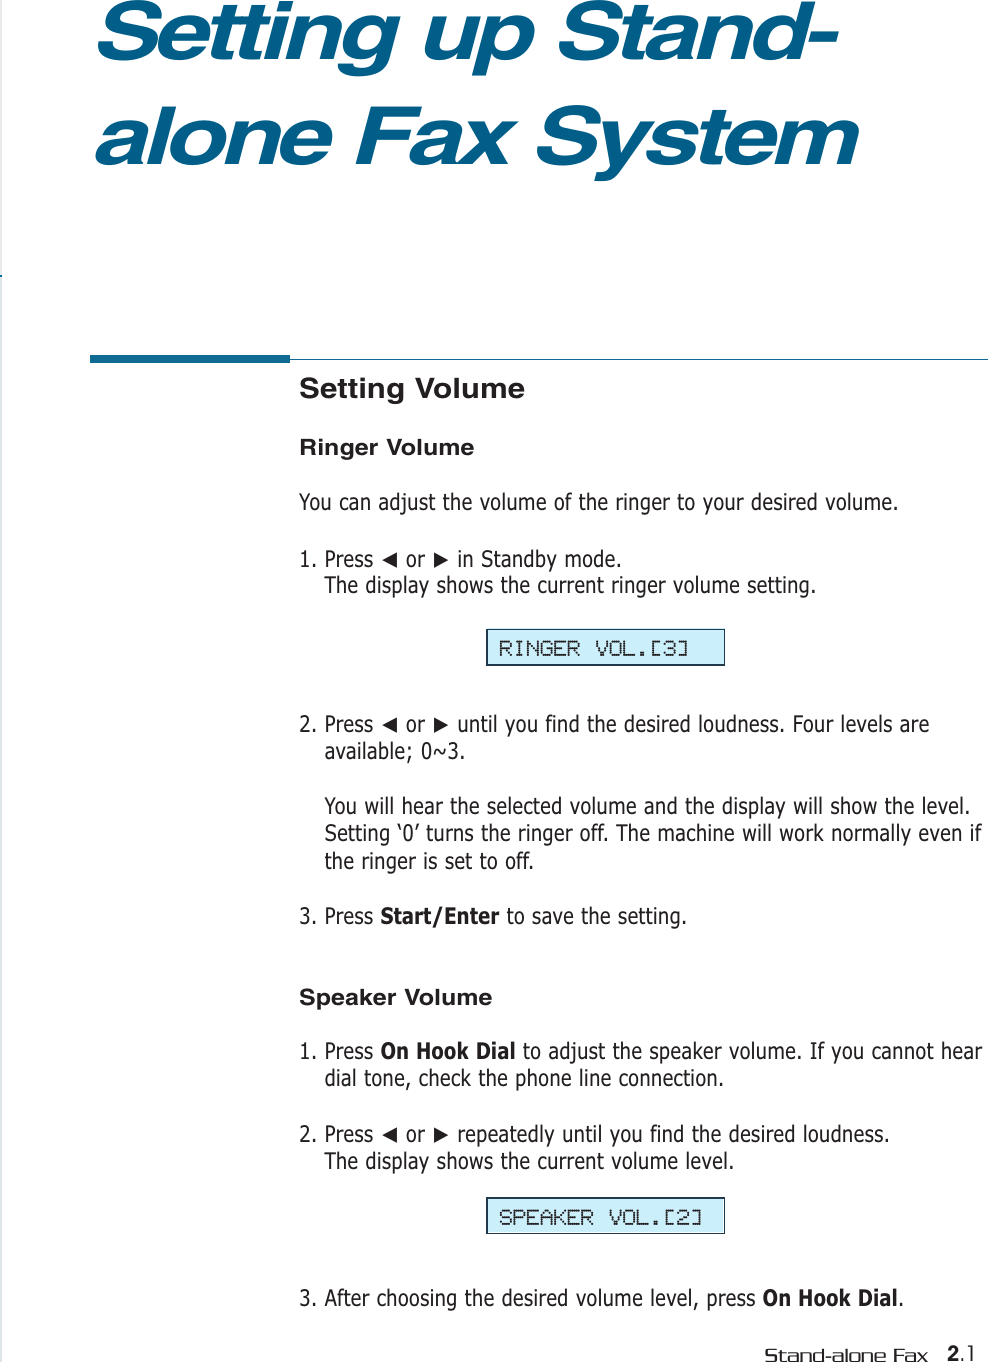 2.1Stand-alone FaxSetting Volume Ringer VolumeYou can adjust the volume of the ringer to your desired volume. 1. Press ➛or ❿in Standby mode. The display shows the current ringer volume setting.  2. Press ➛or ❿until you find the desired loudness. Four levels areavailable; 0~3. You will hear the selected volume and the display will show the level.Setting ‘0’ turns the ringer off. The machine will work normally even ifthe ringer is set to off.3. Press Start/Enter to save the setting.Speaker Volume1. Press On Hook Dial to adjust the speaker volume. If you cannot heardial tone, check the phone line connection.2. Press ➛or ❿repeatedly until you find the desired loudness. The display shows the current volume level.3. After choosing the desired volume level, press On Hook Dial.Setting up Stand-alone Fax SystemRINGER VOL.[3]SPEAKER VOL.[2]